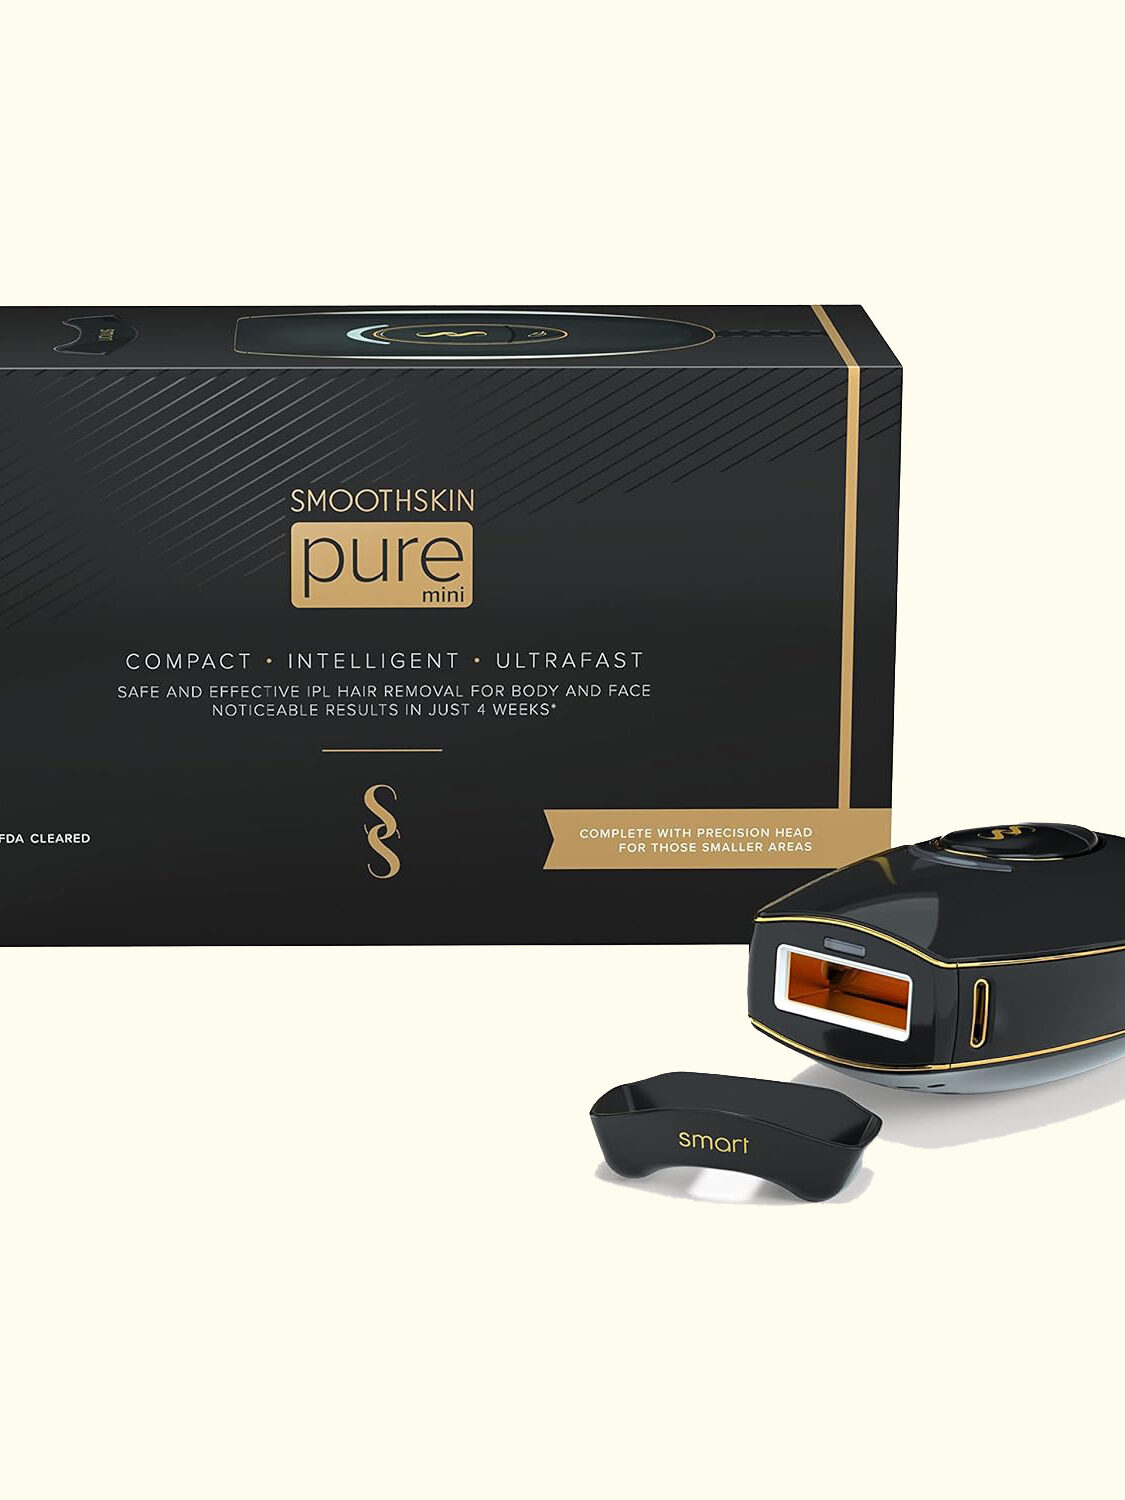 A black box with a laser hair removal device from Smoothskin.